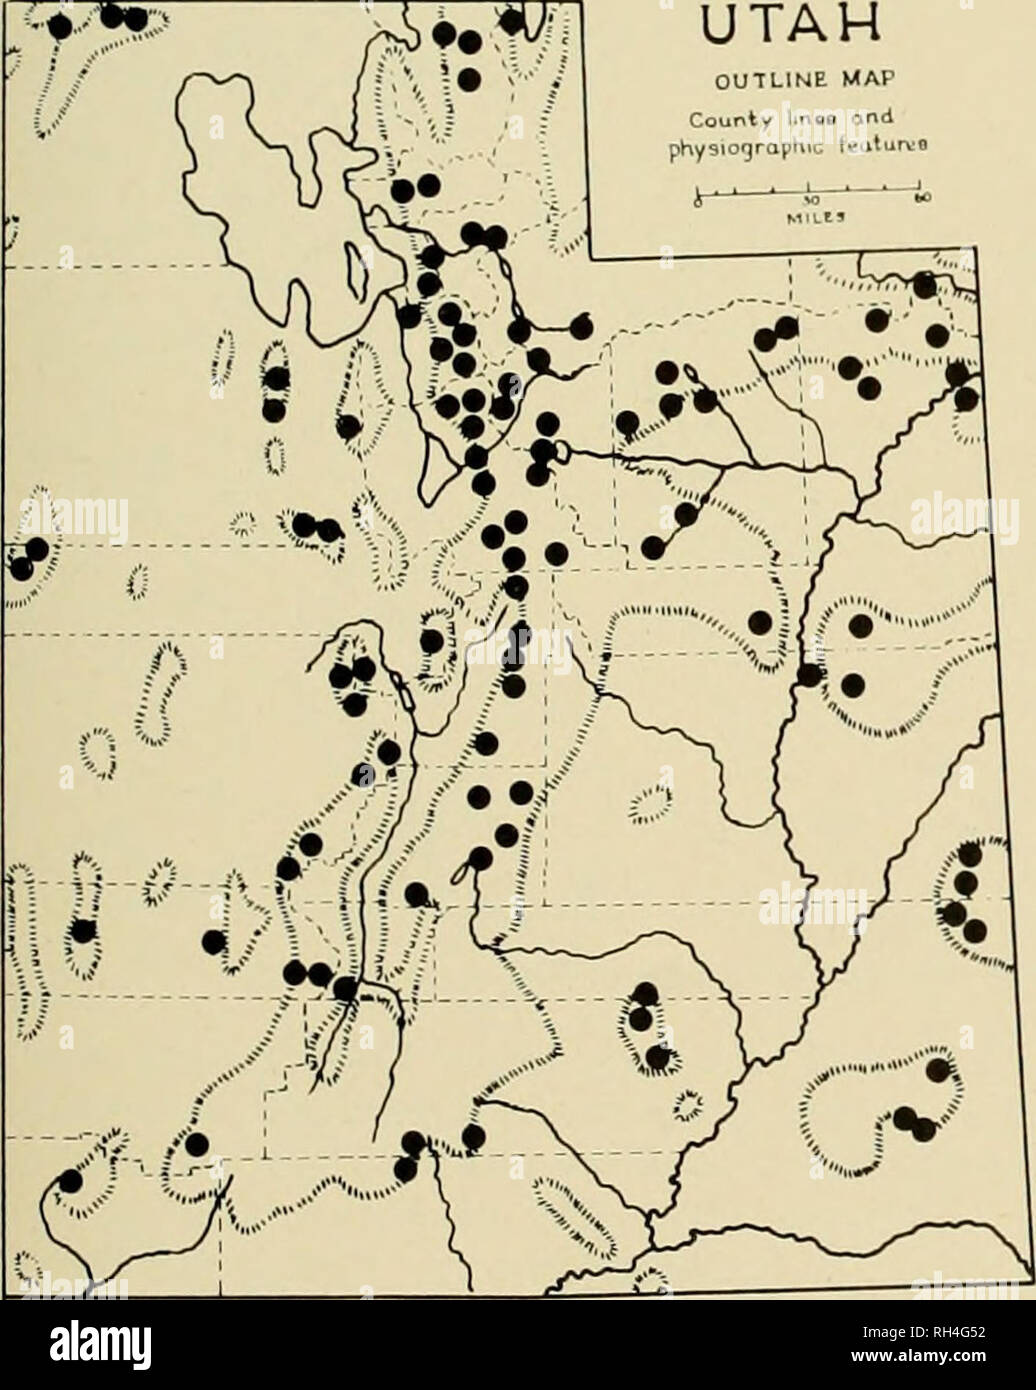 . Brigham Young University science bulletin. Biology -- Periodicals. Fig. 36. Prosopis pubescens Benth. ^mj UTAH OUTLINE MAP County linoB find phySiOfjraphiG tk^uturvo. Fig. 37. h'liinis lirginiana L. var. mclanocarpa (A. Ncls.) Moldenke Pniniis virginiana L. var. melanocarpa (A. Nels.) Moldenke (Fig. 37) Chokecherry is found throughout Utah's moun- tains in a variety of habitats. Under favorable condi- tions it may form large streamside groves where the trunks are many inches in diameter. However, it is also an early invader of talus slopes where plants, a foot or two in height, may be many  Stock Photo